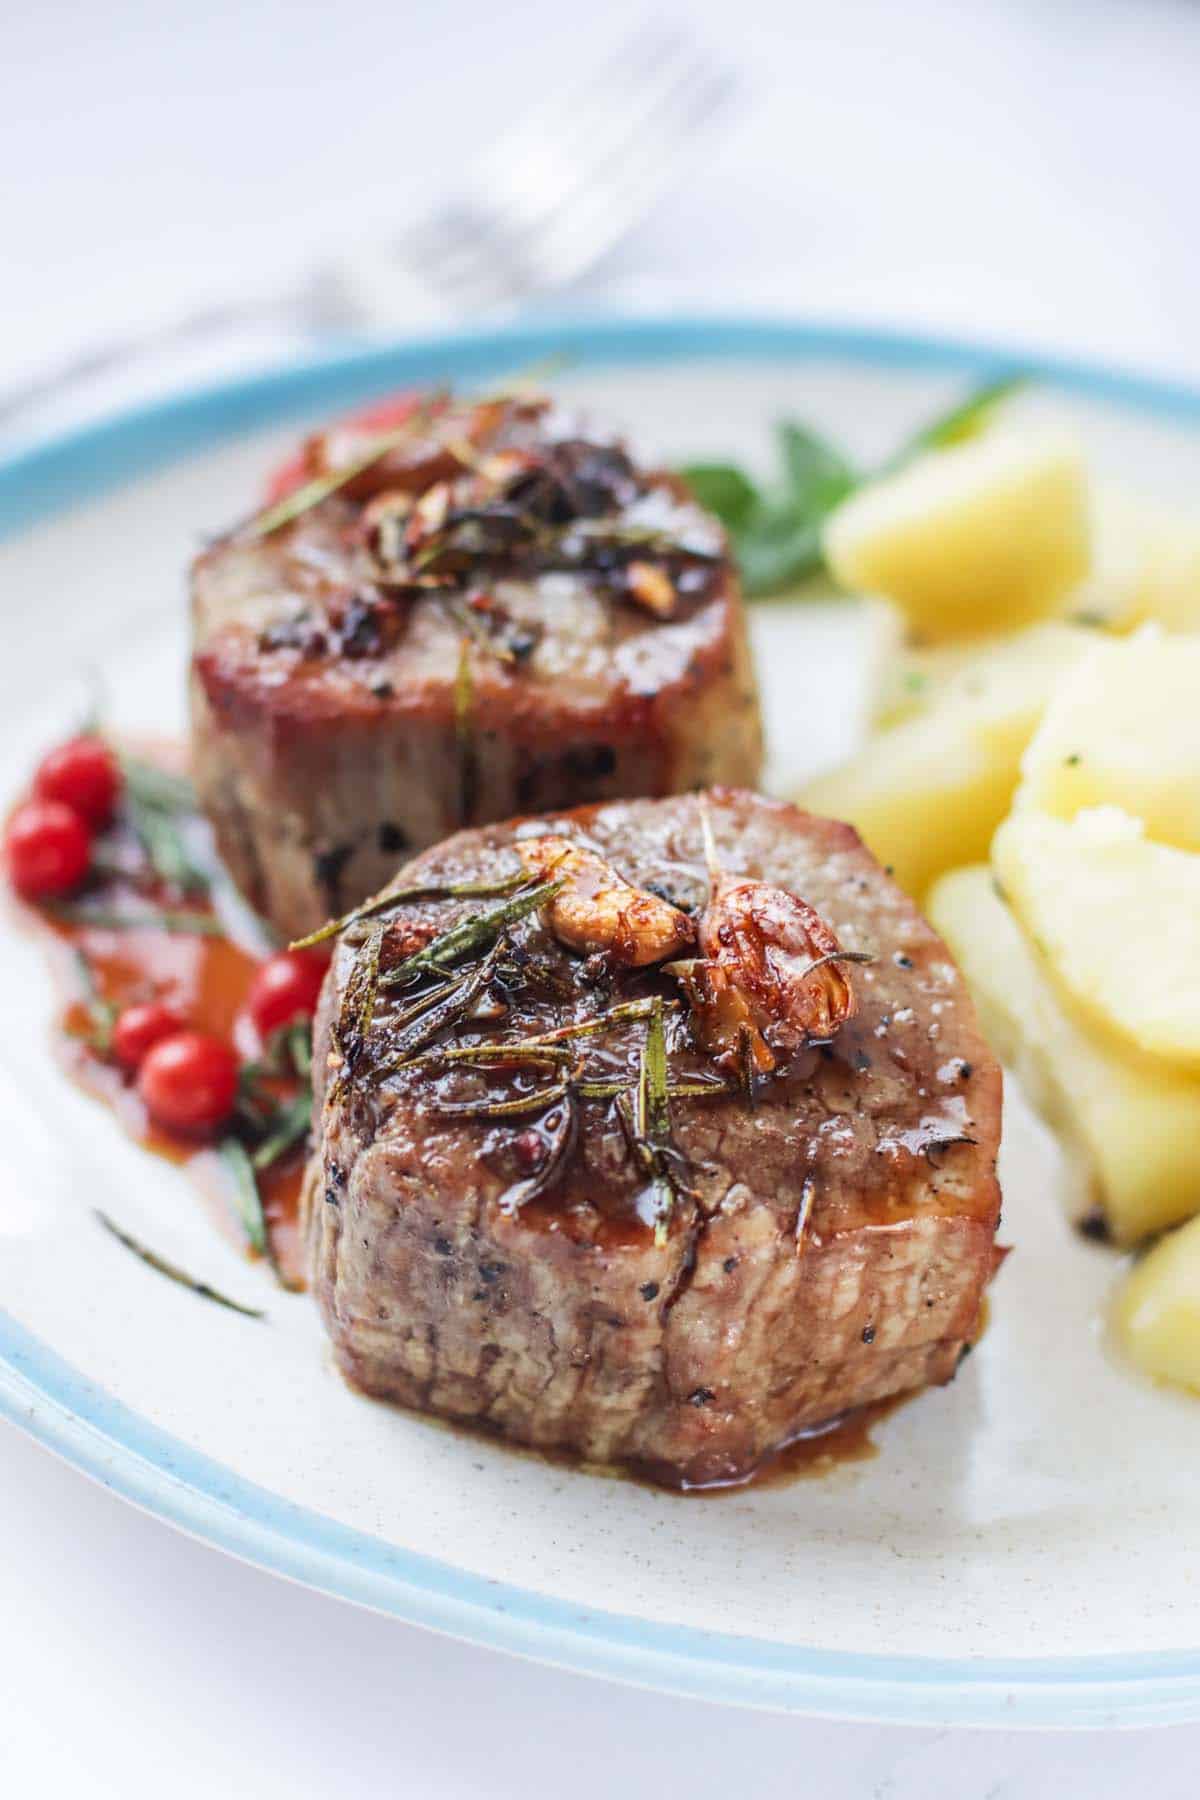 Filet mignon on a plate topped with garlic and rosemary.